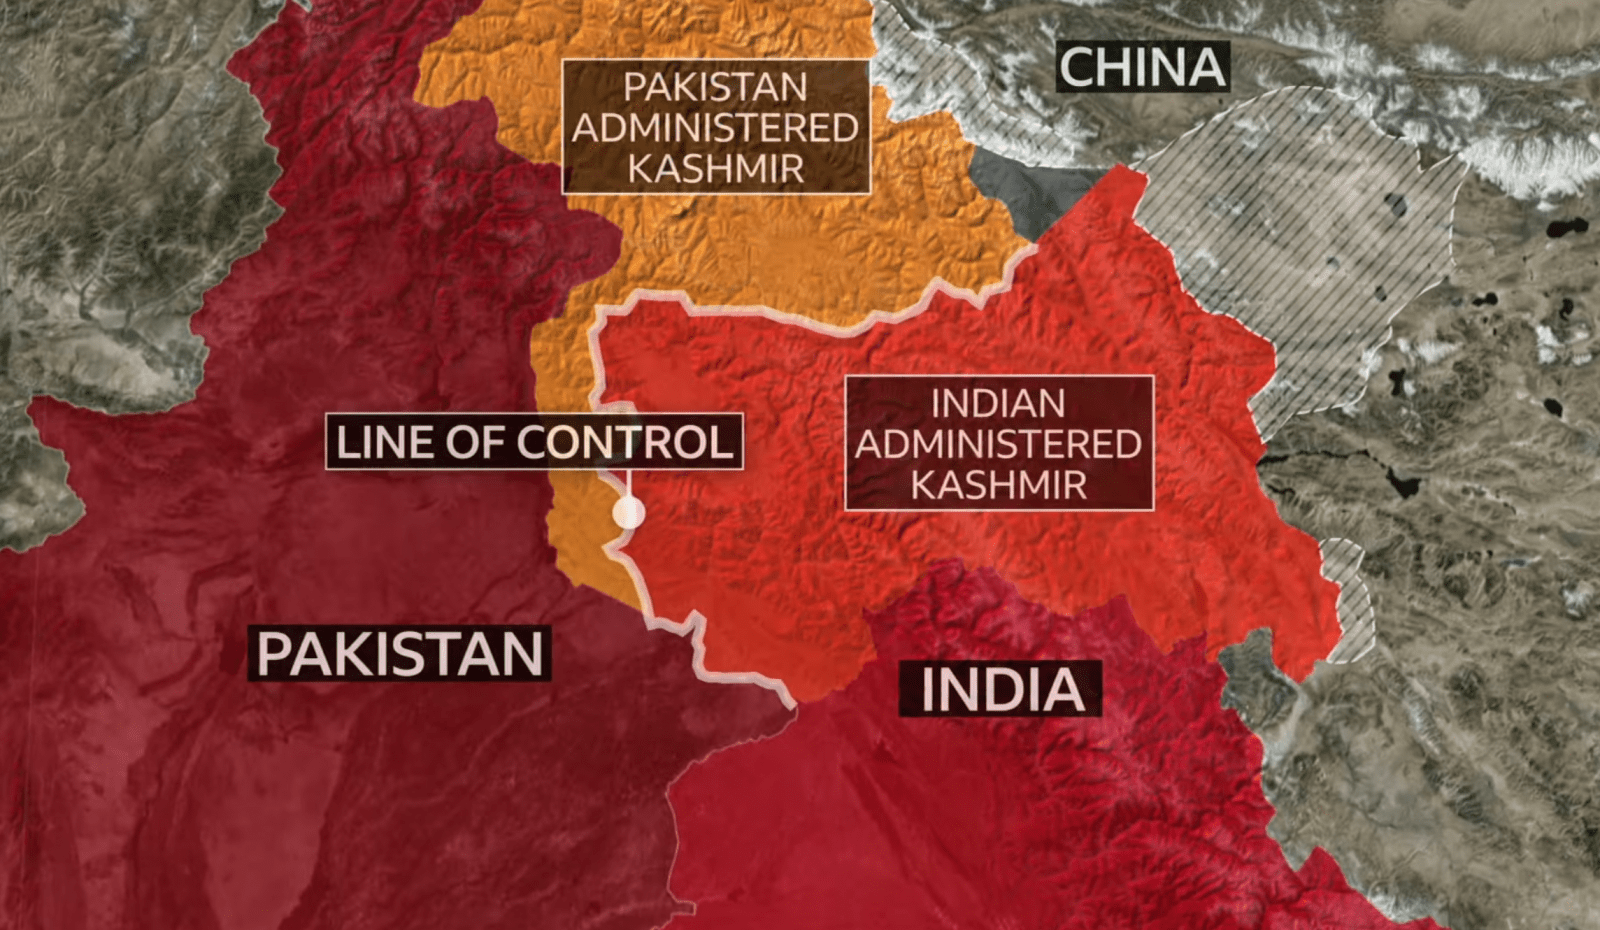 Kashmir, Article 370 and Pakistan’s Stance